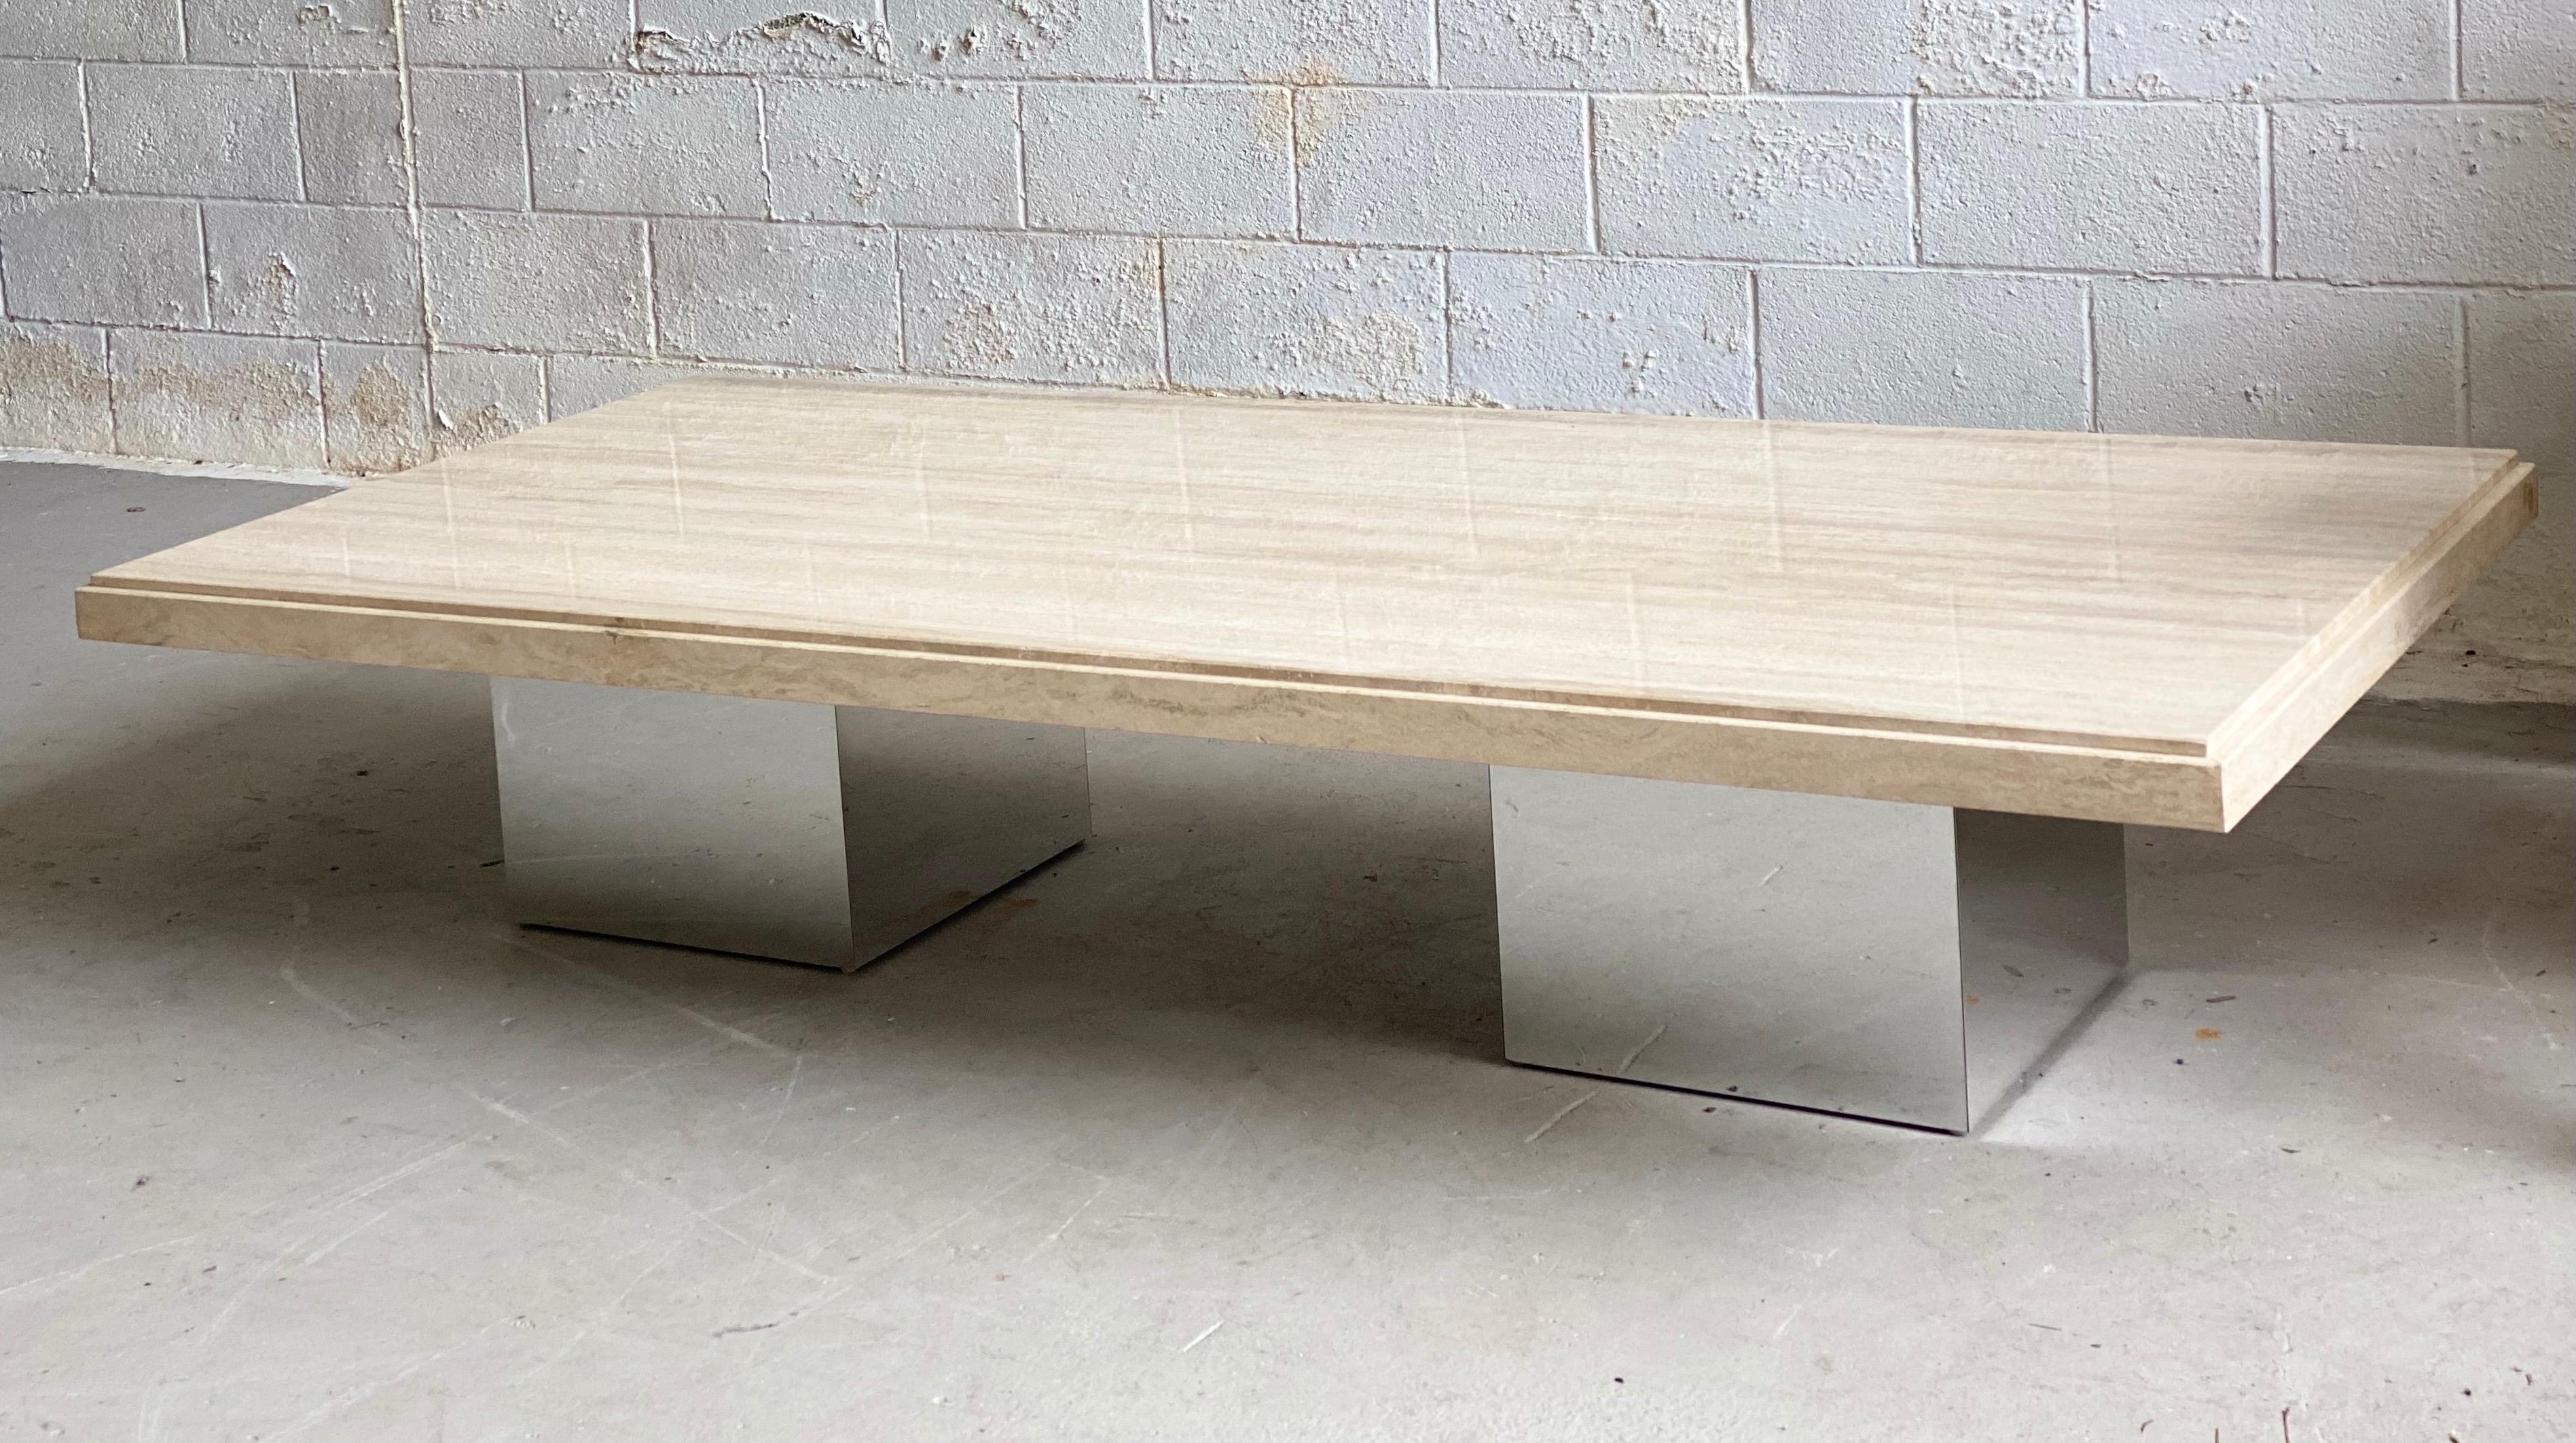 We are very pleased to offer a classic, monumental coffee table, circa the 1970s. This coffee table is a beautiful balance of simple forms and finishes. Two square bases, with a metal chrome finish, make a stable support for a wide and heavy,